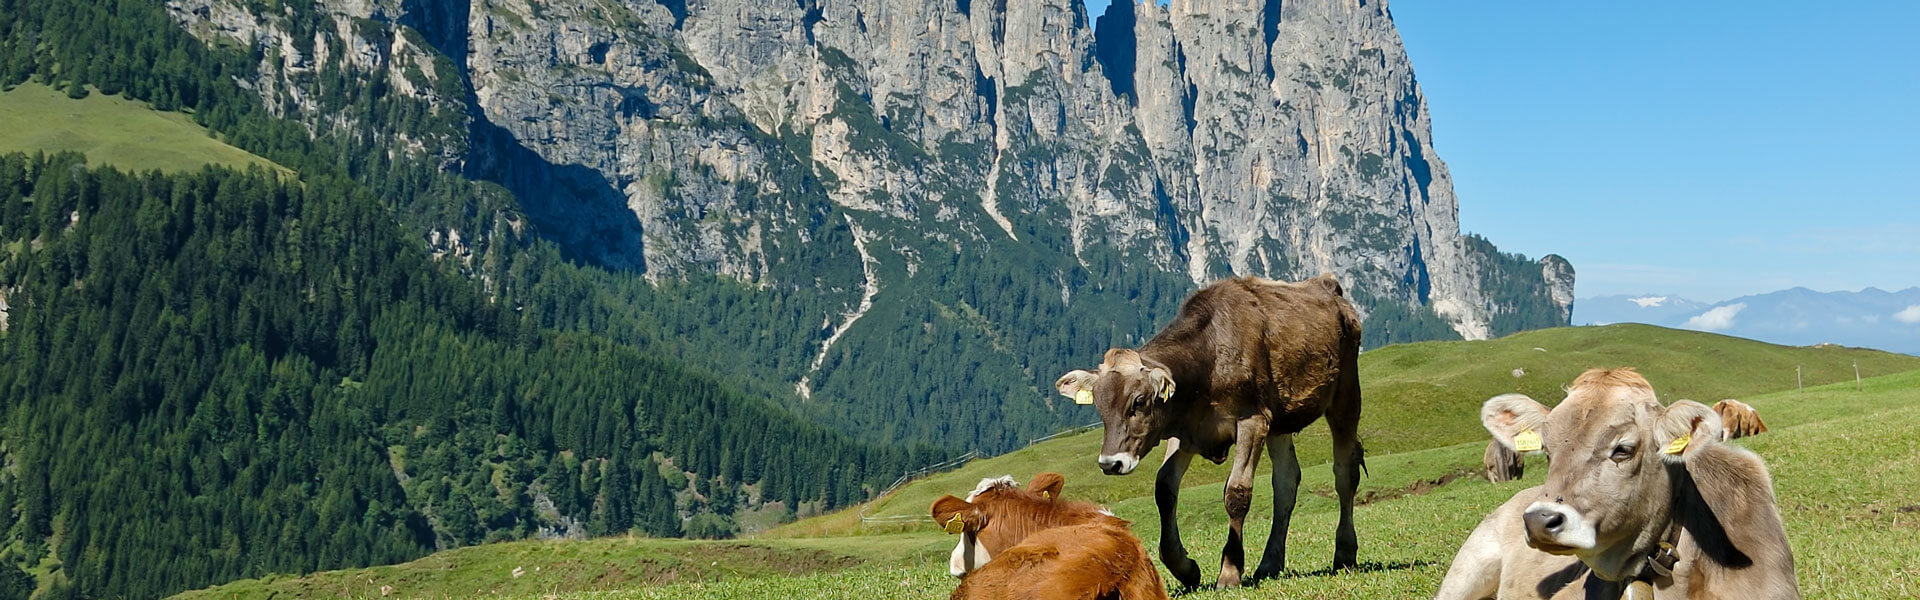 A hike through the Alps holds many scenic highlights.